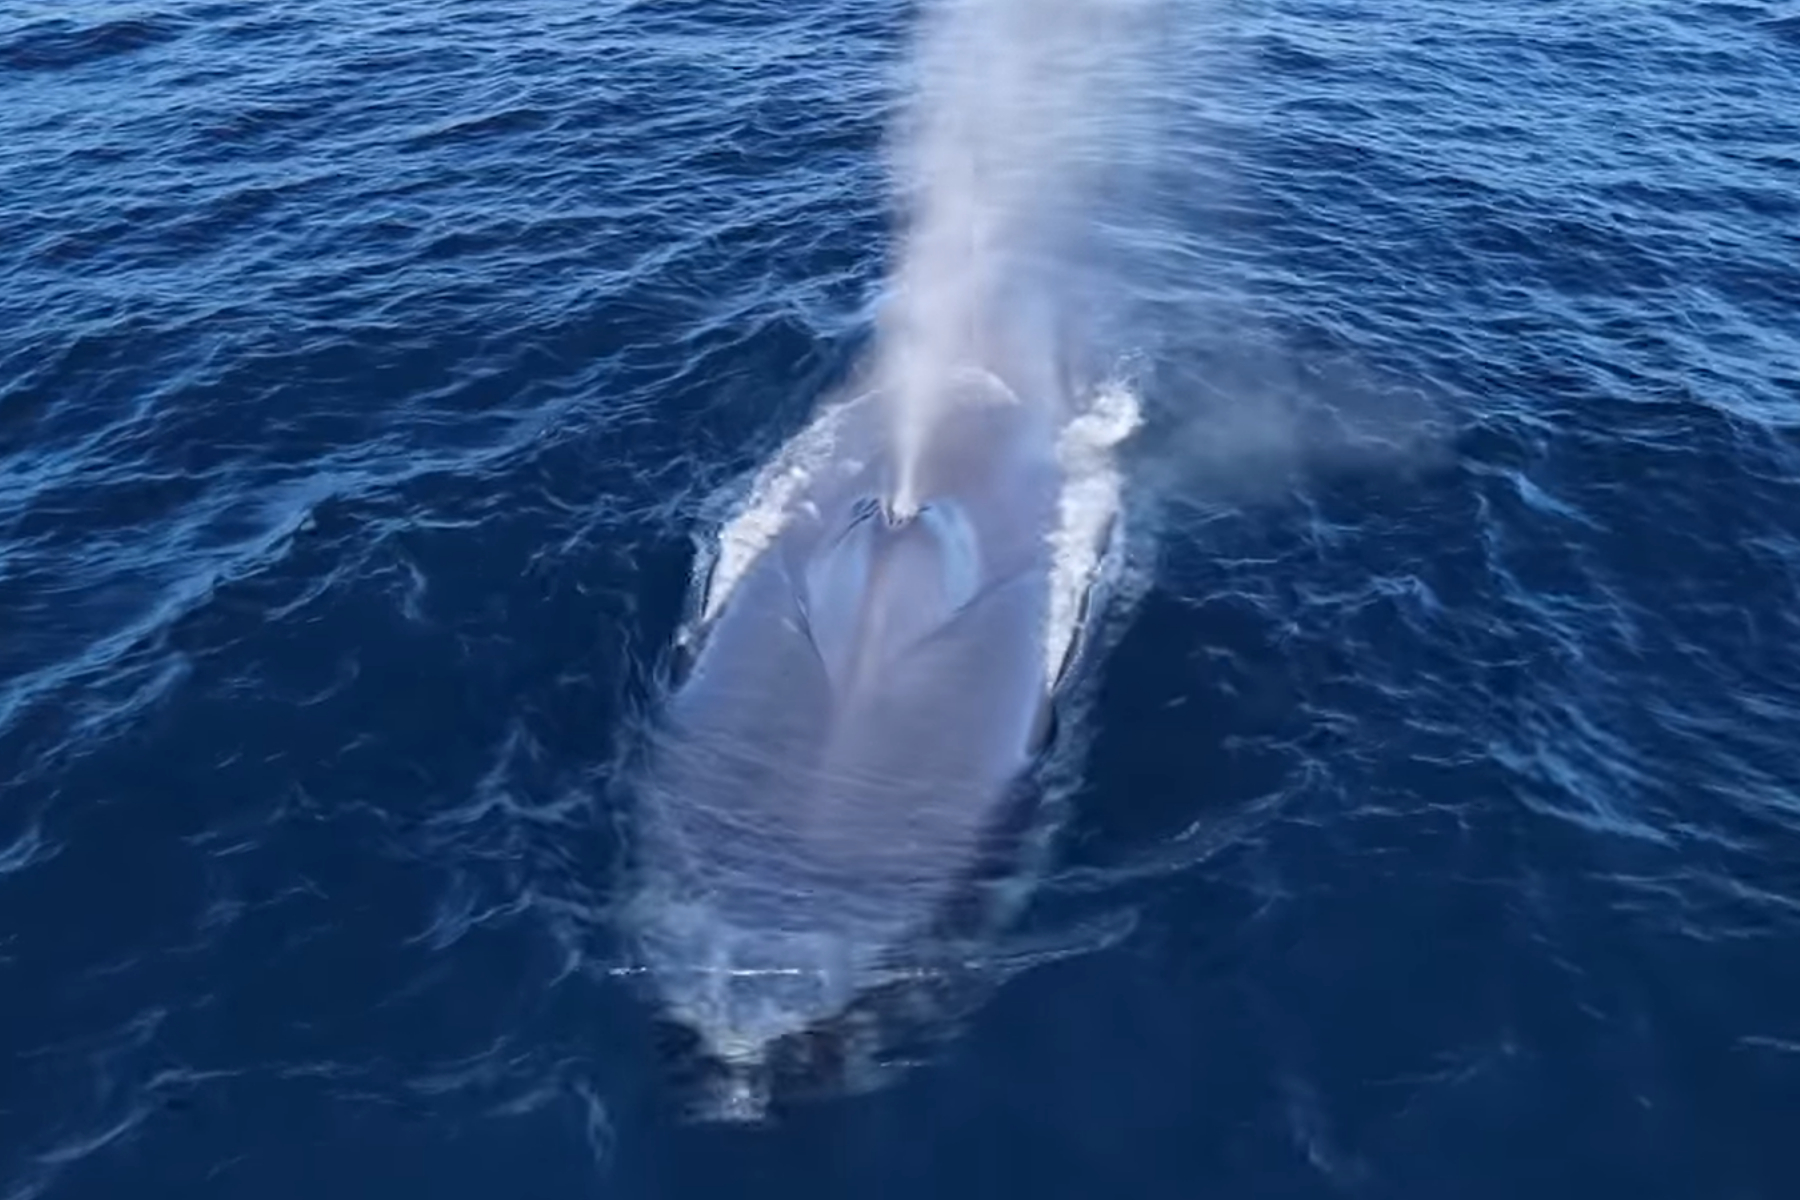 largest blue whale ever recorded